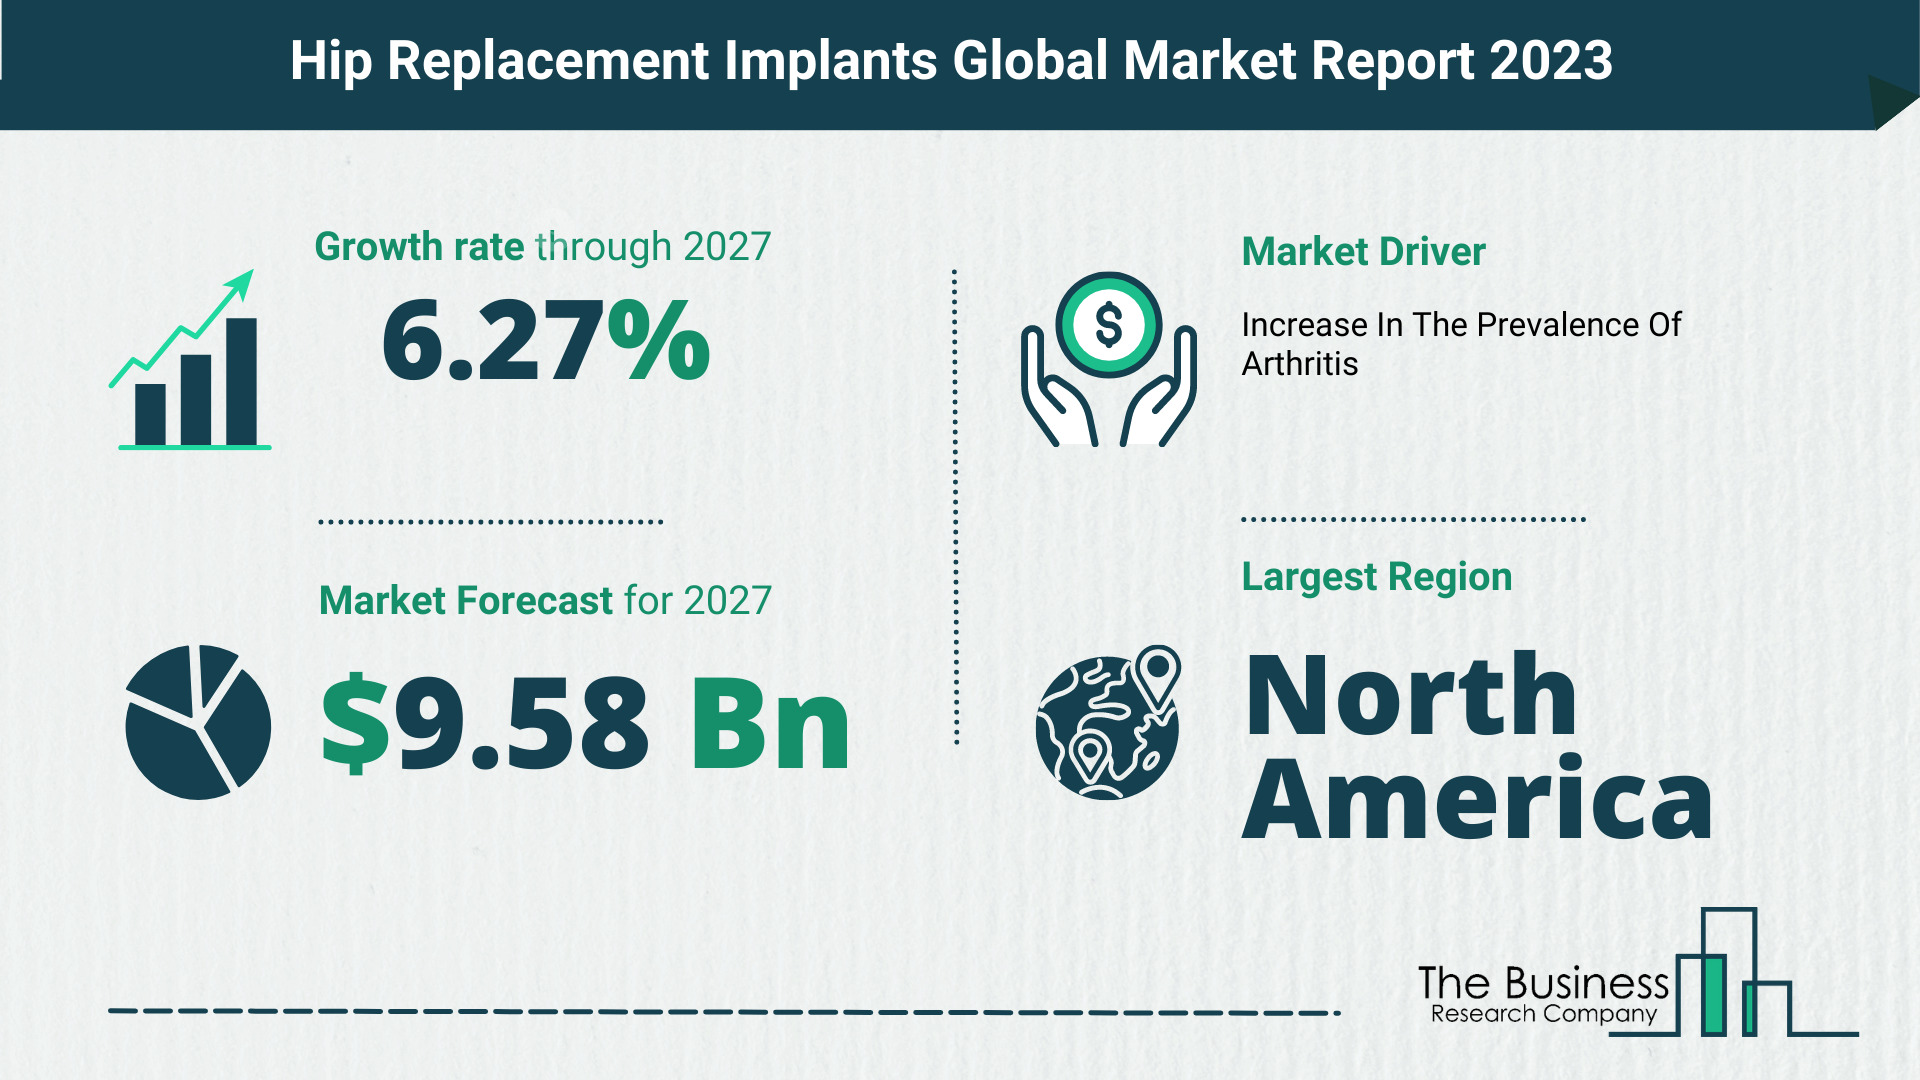 How Will The Hip Replacement Implants Market Globally Expand In 2023?